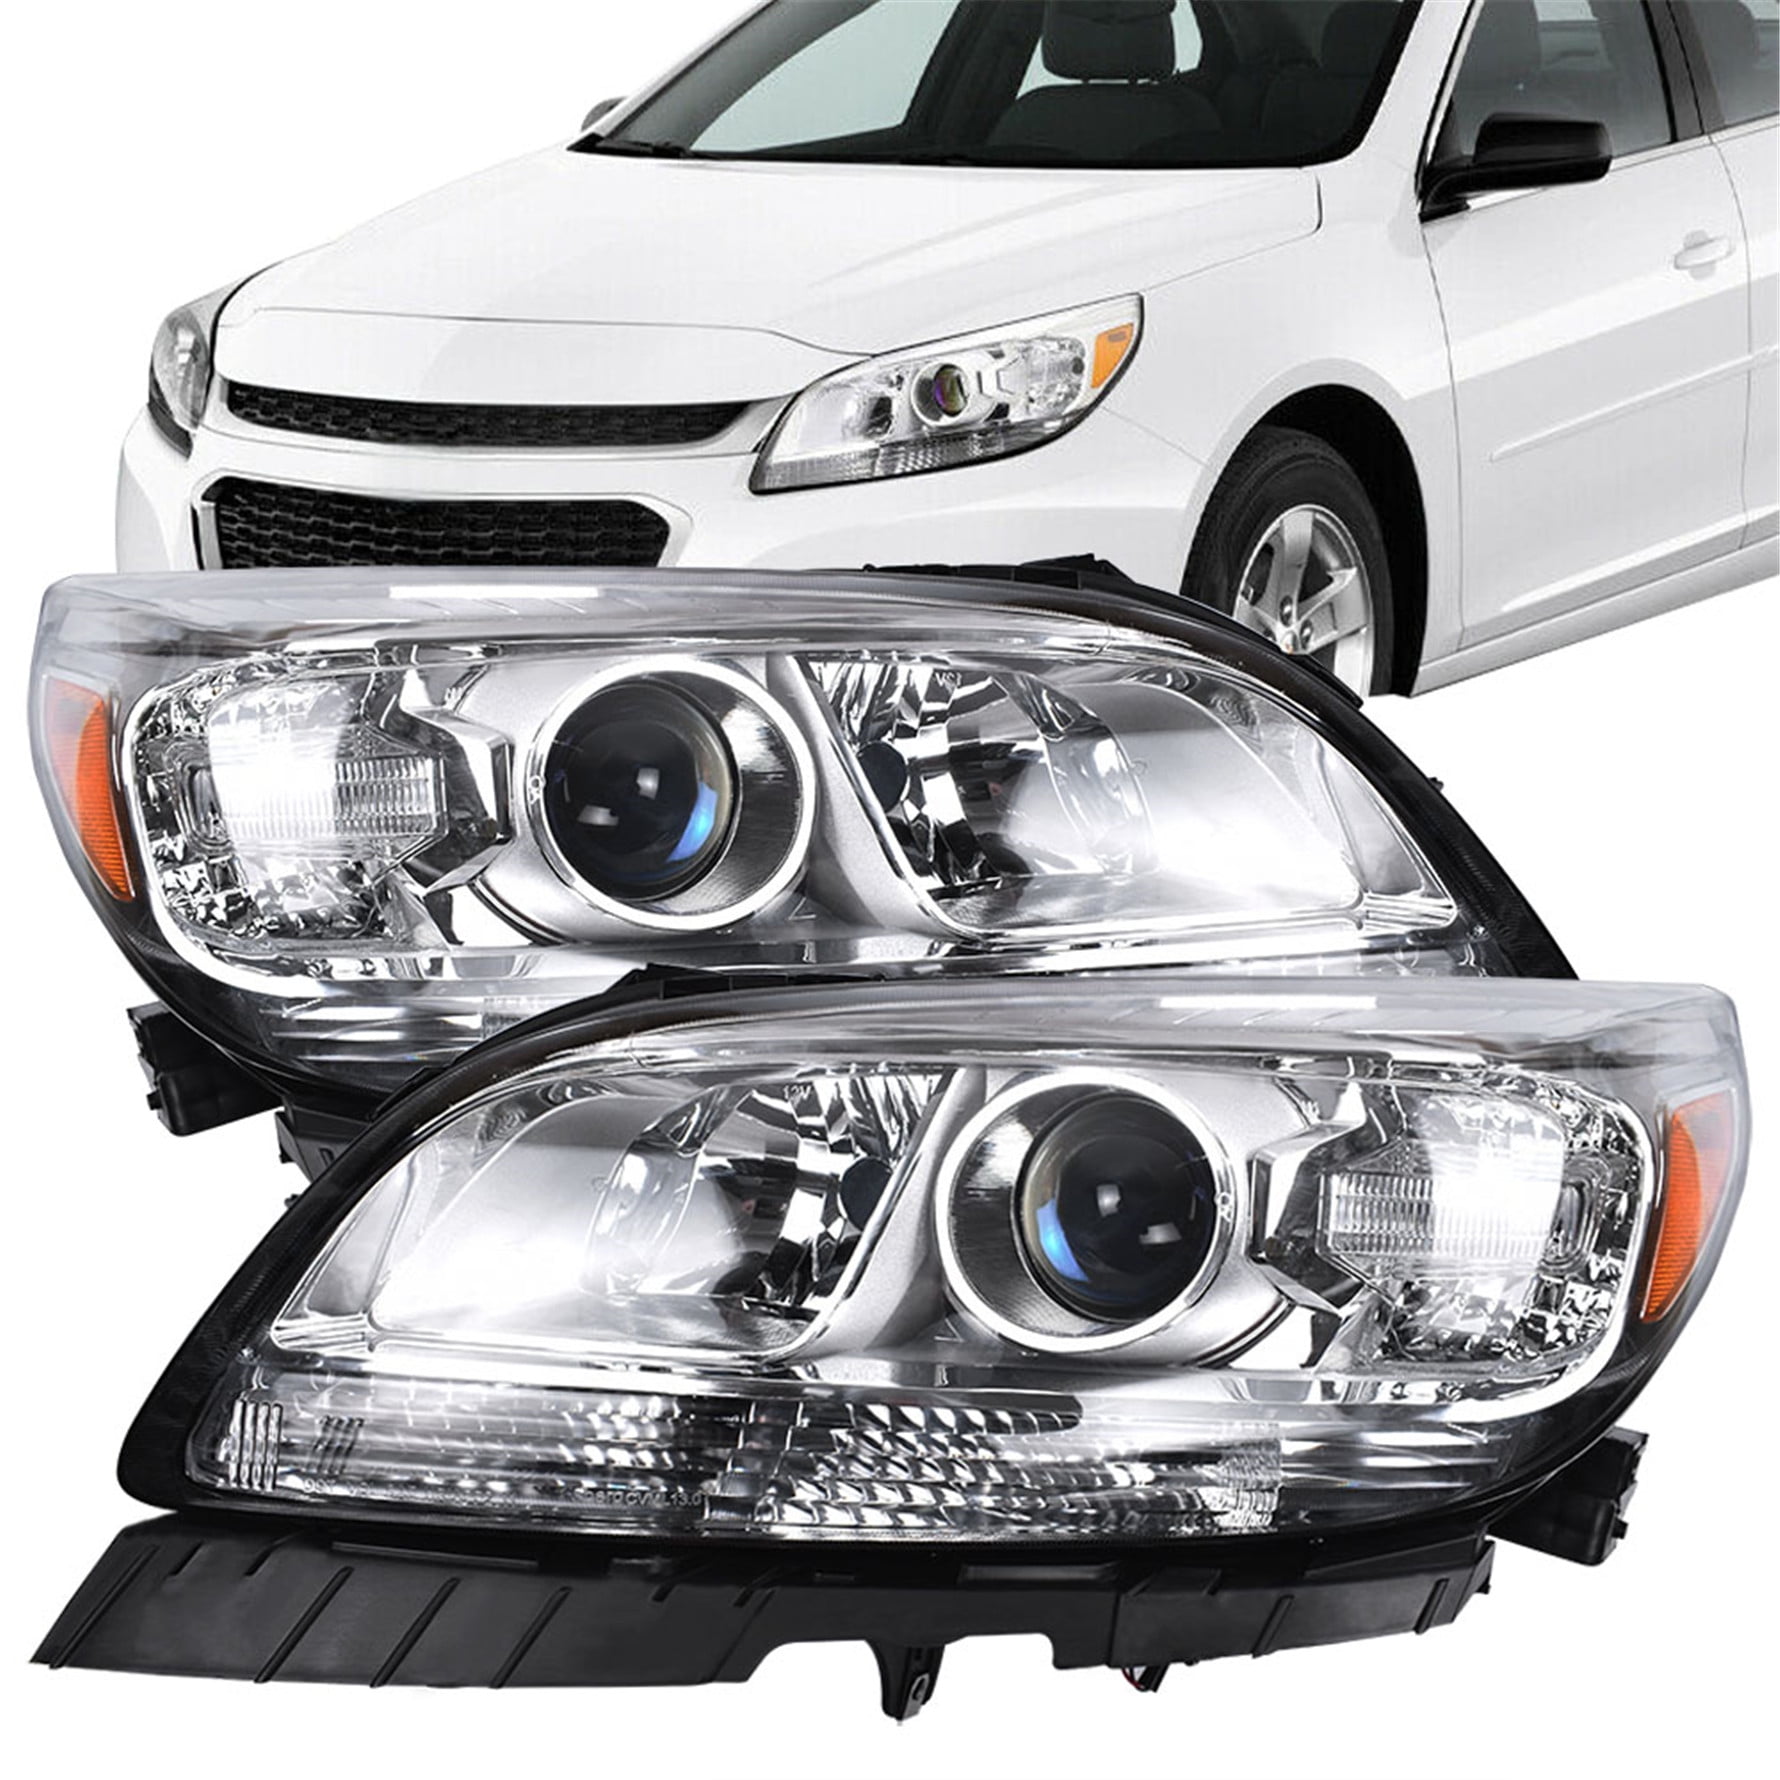 Headlight Assembly for 2013 2014 2015 Chevy Malibu Projector Headlamp Left+Right